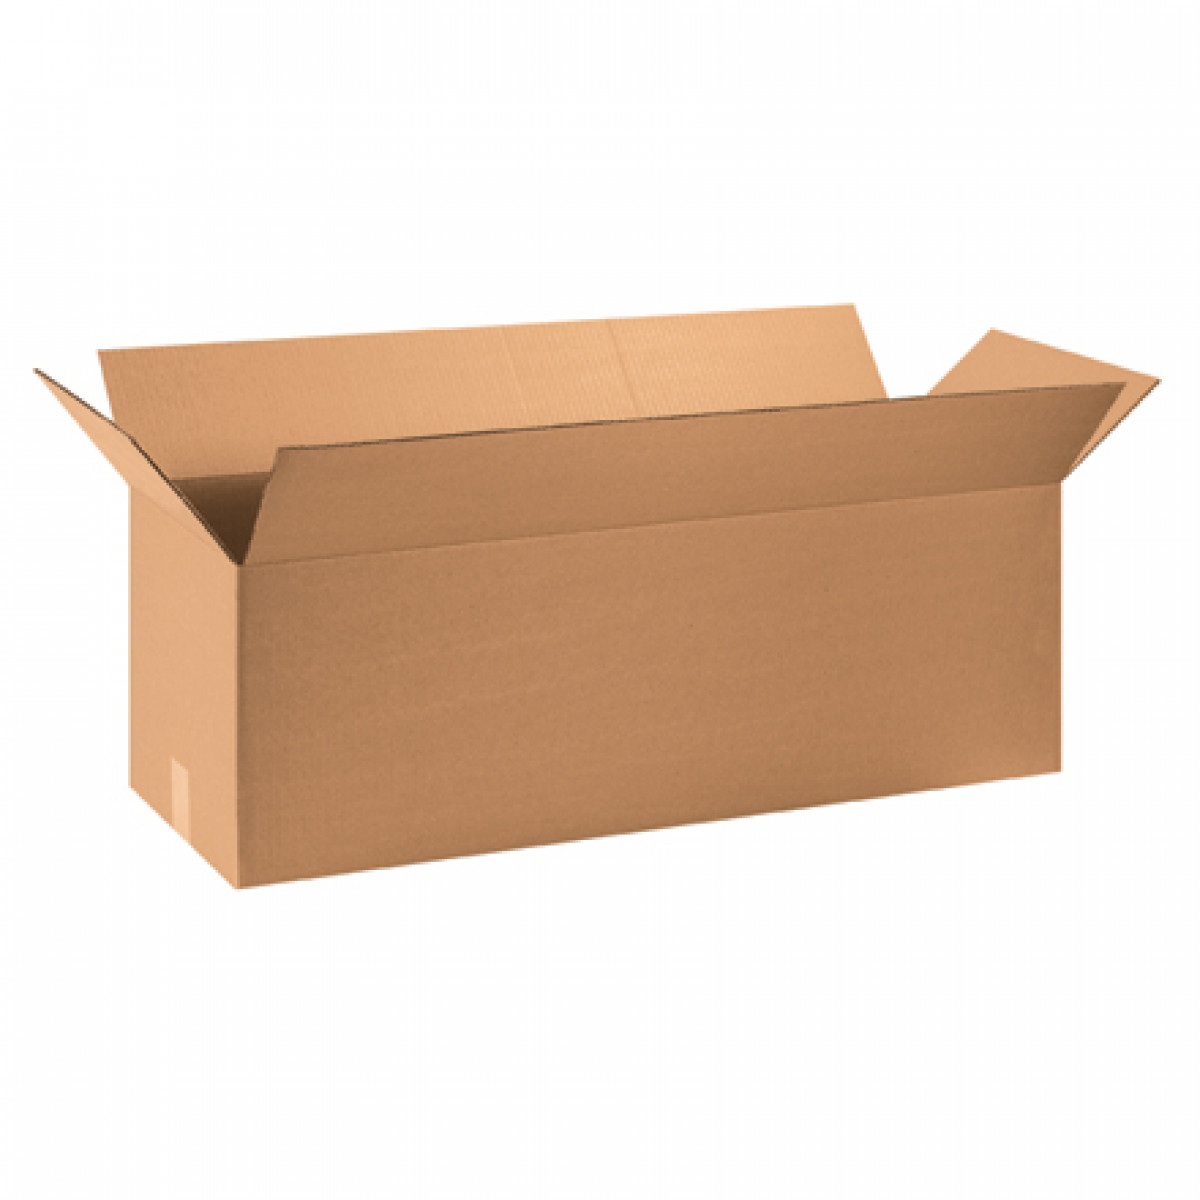 36" x 12" x 10" Long Corrugated Boxes 20ct